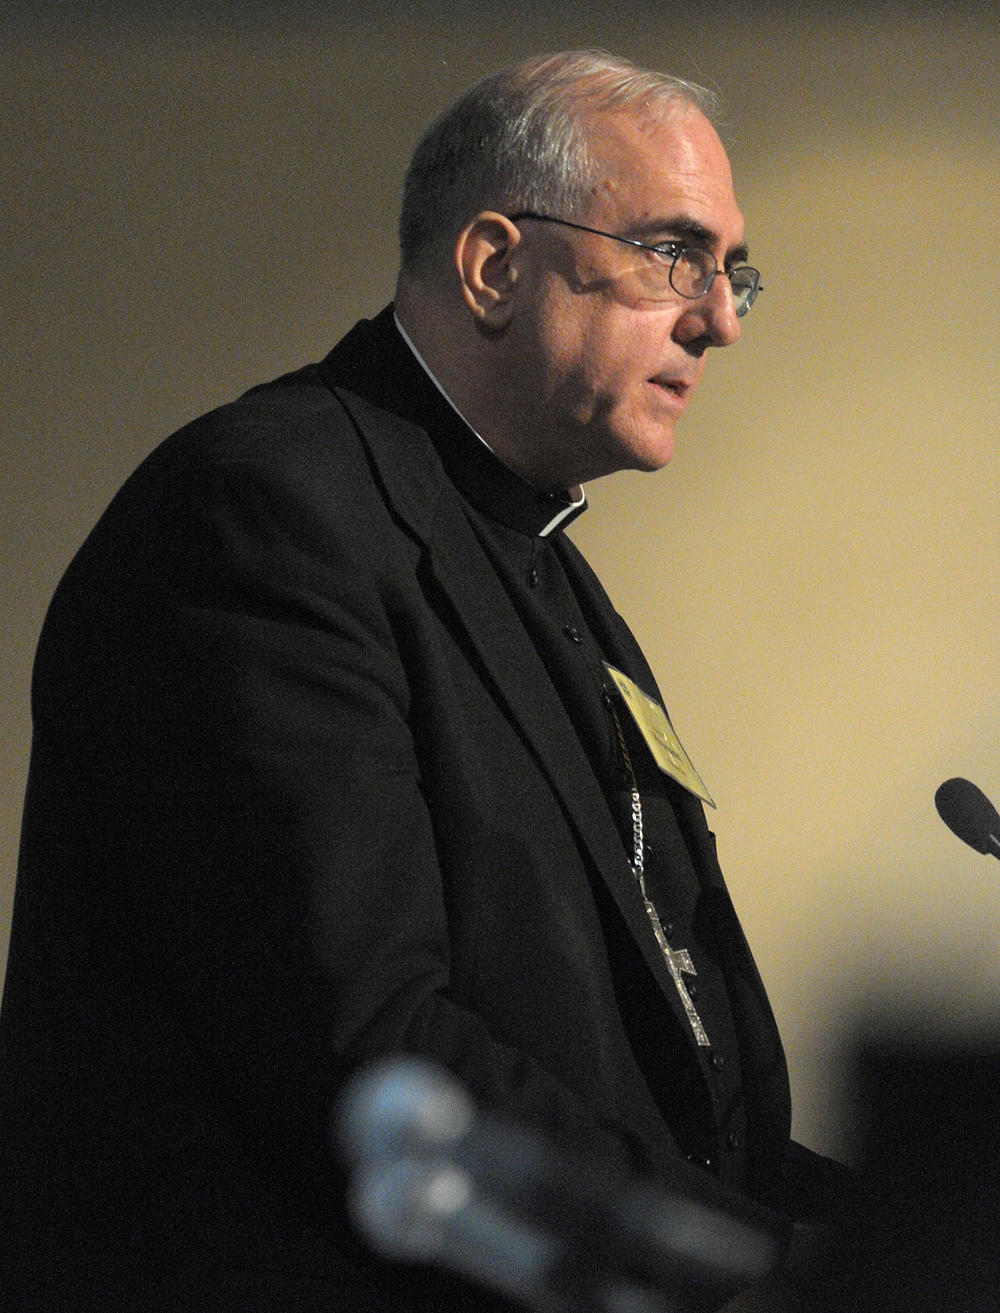 Archbishop Joseph Naumann, of Kansas City, presents a report on stem-cell research during the general meeting of the U.S. Conference of Catholic Bishops in Orlando, Fla., Thursday, June 12, 2008.